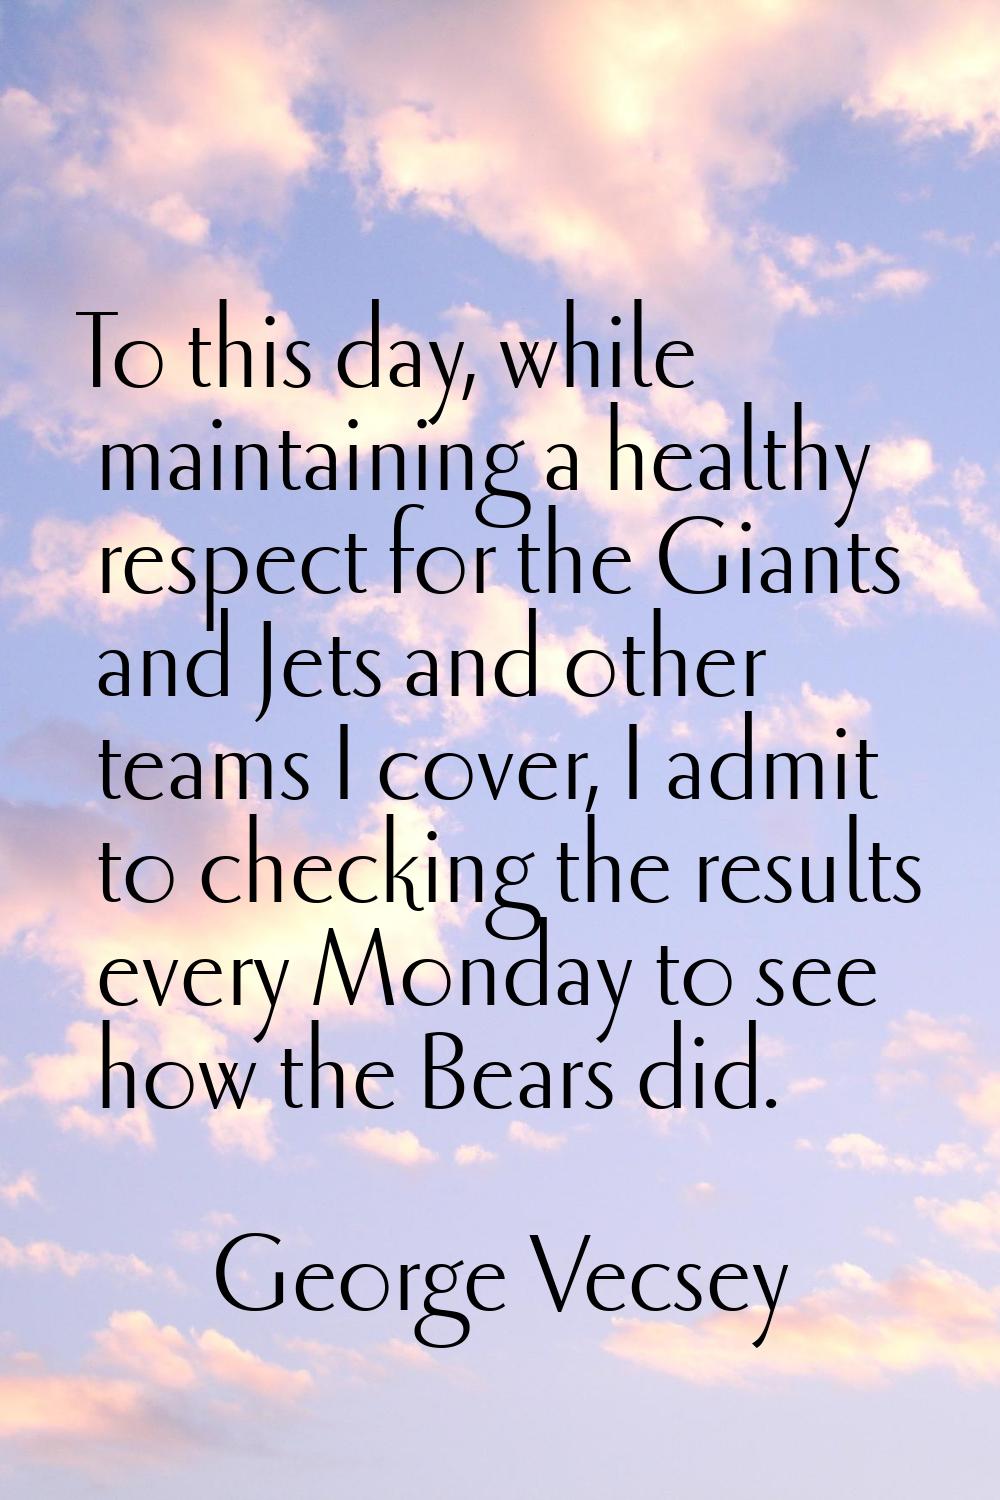 To this day, while maintaining a healthy respect for the Giants and Jets and other teams I cover, I